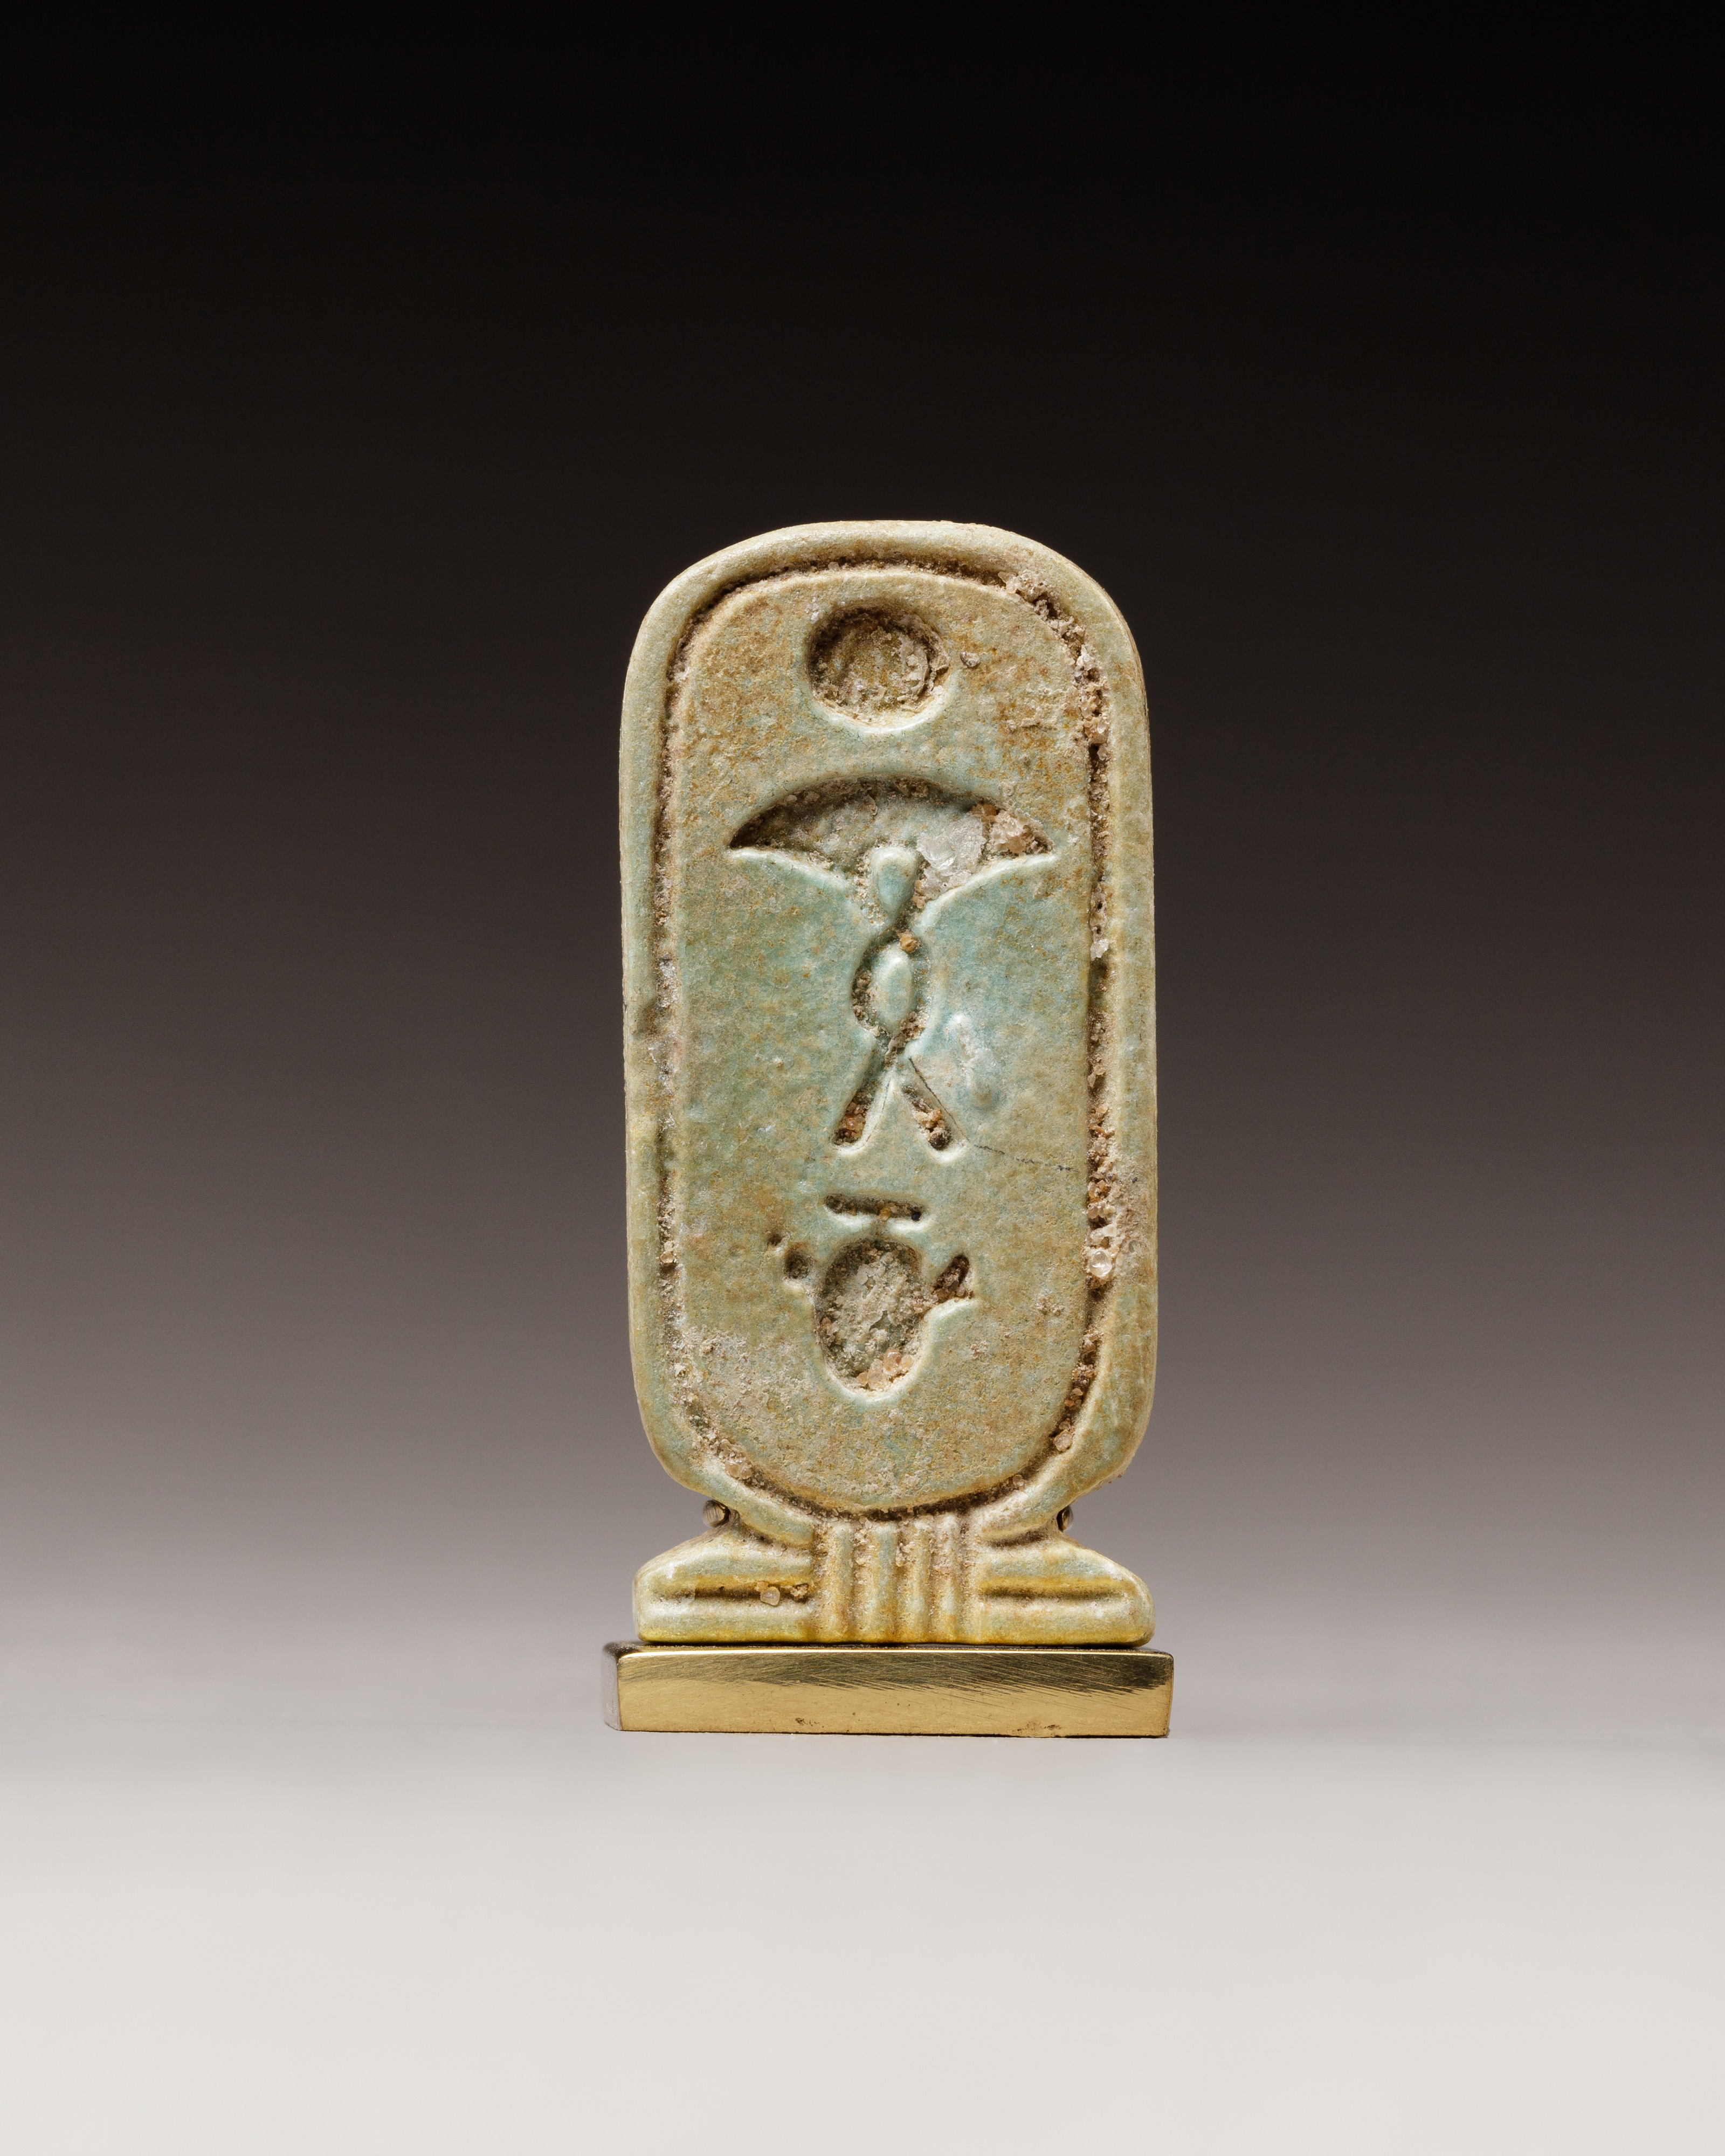 Cartouche-shaped plaque with the names of Apries, Late Period, Saite